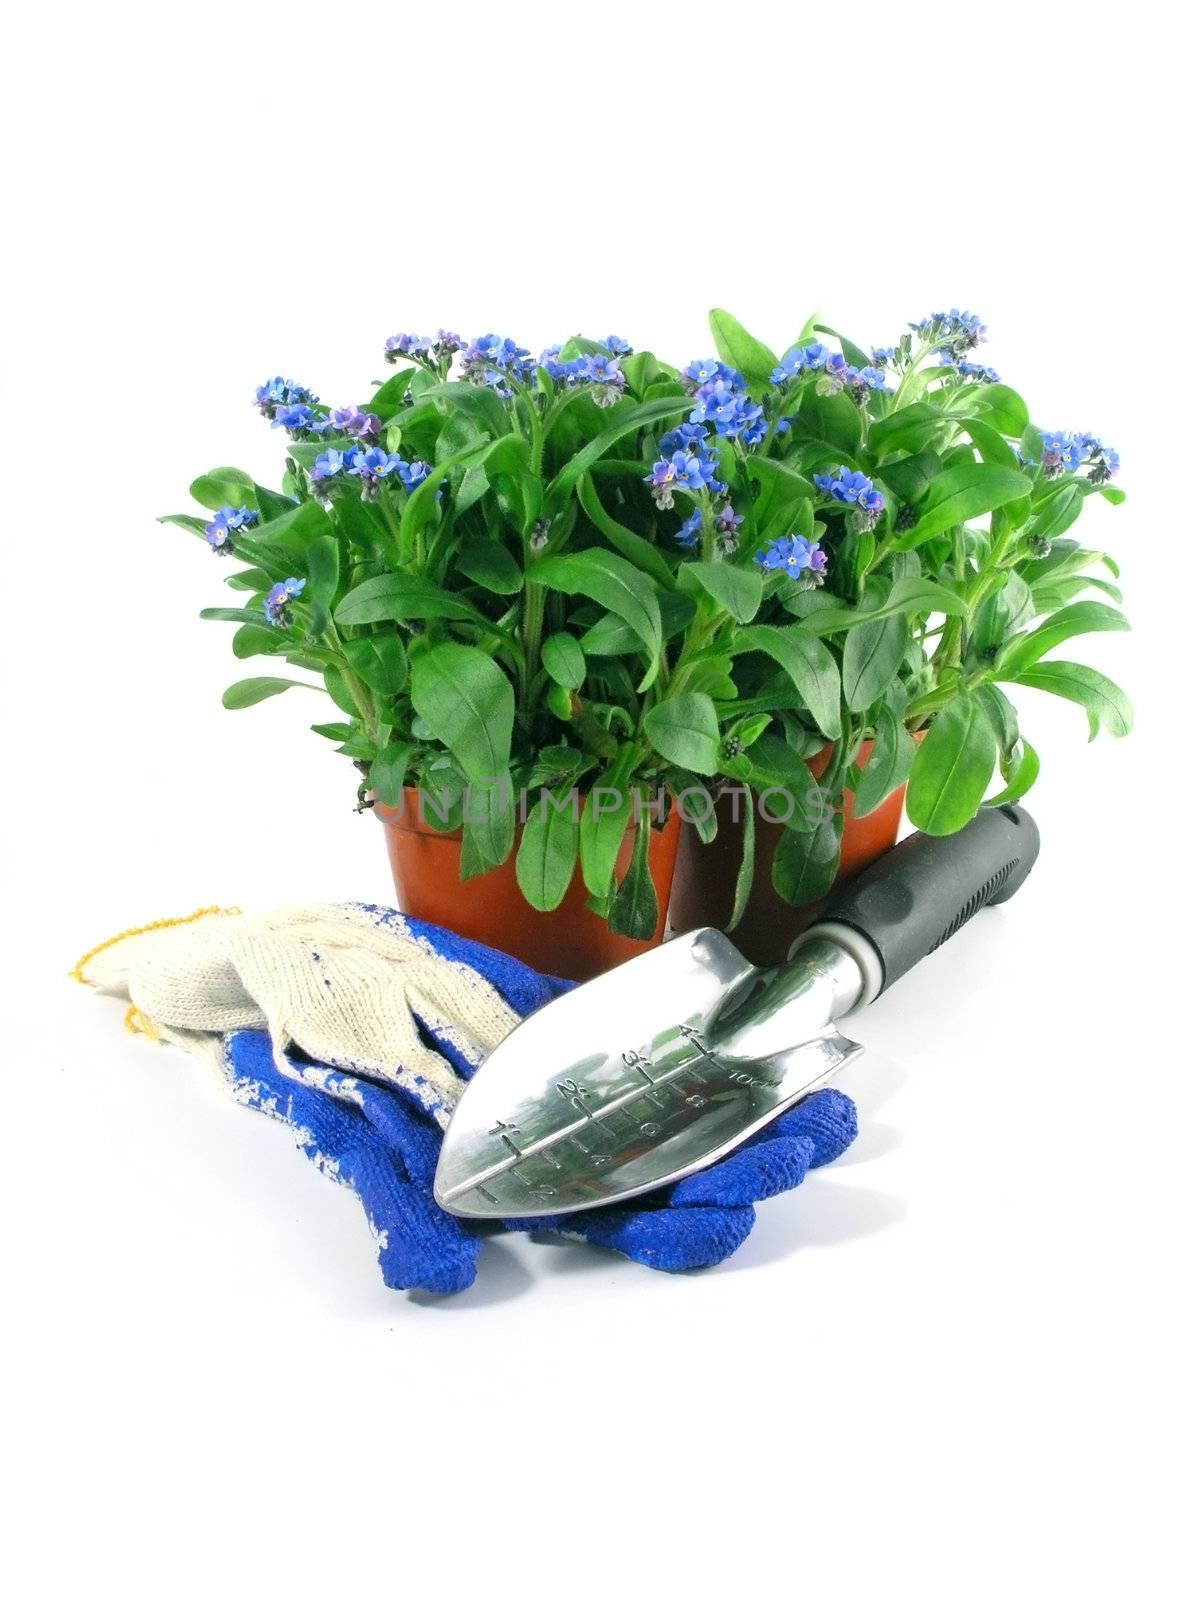 forget-me-not seedling in pot isolated on white background